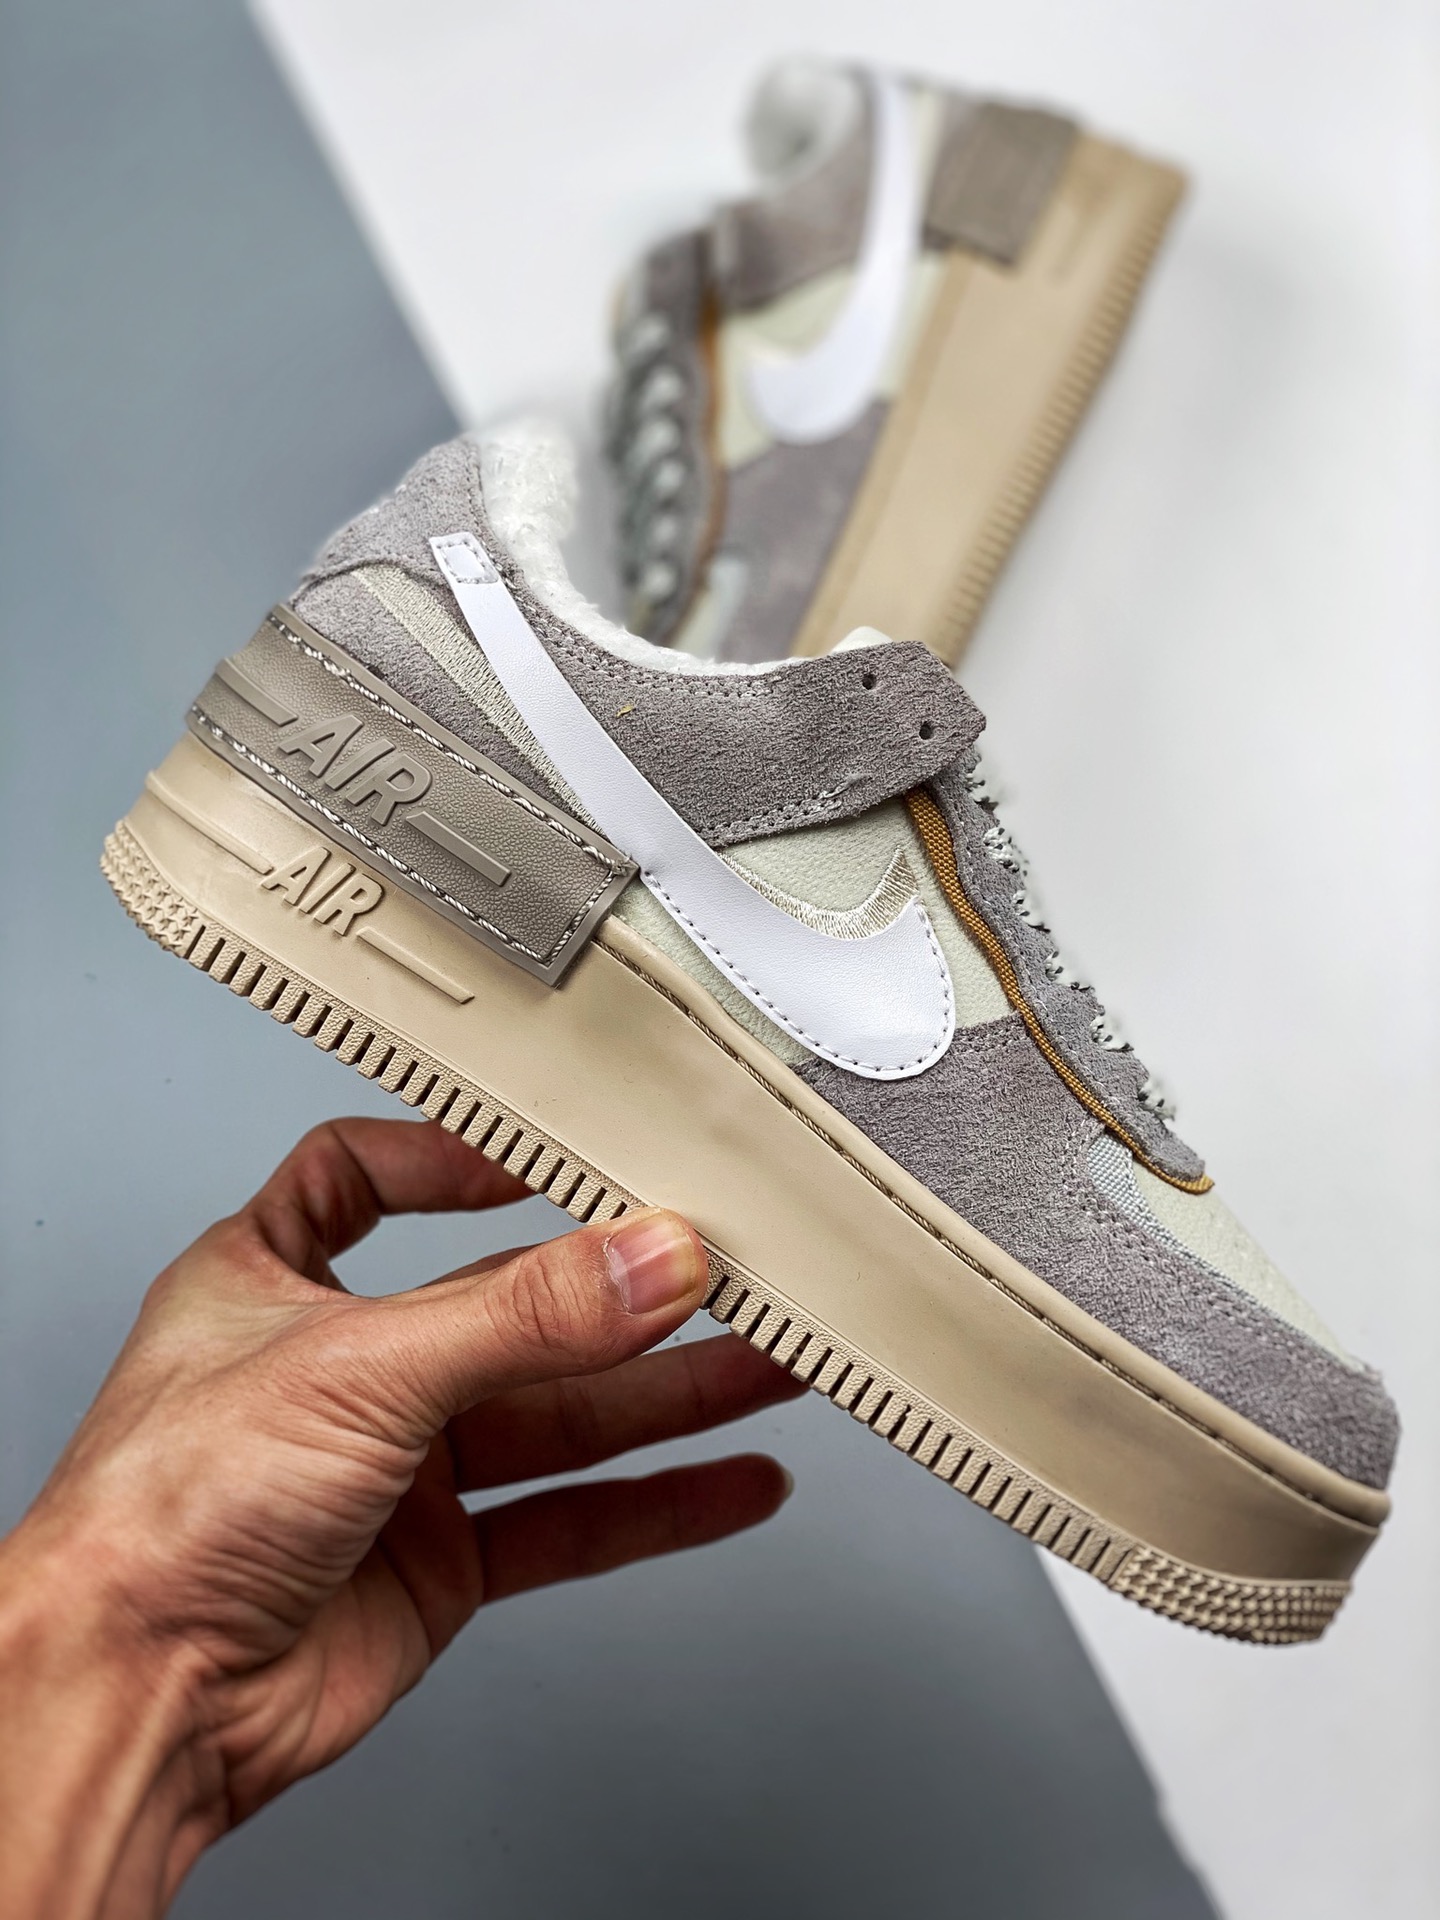 Nike Air Force 1 Shadow “Wild” DC5270-016 For Sale – Sneaker Hello